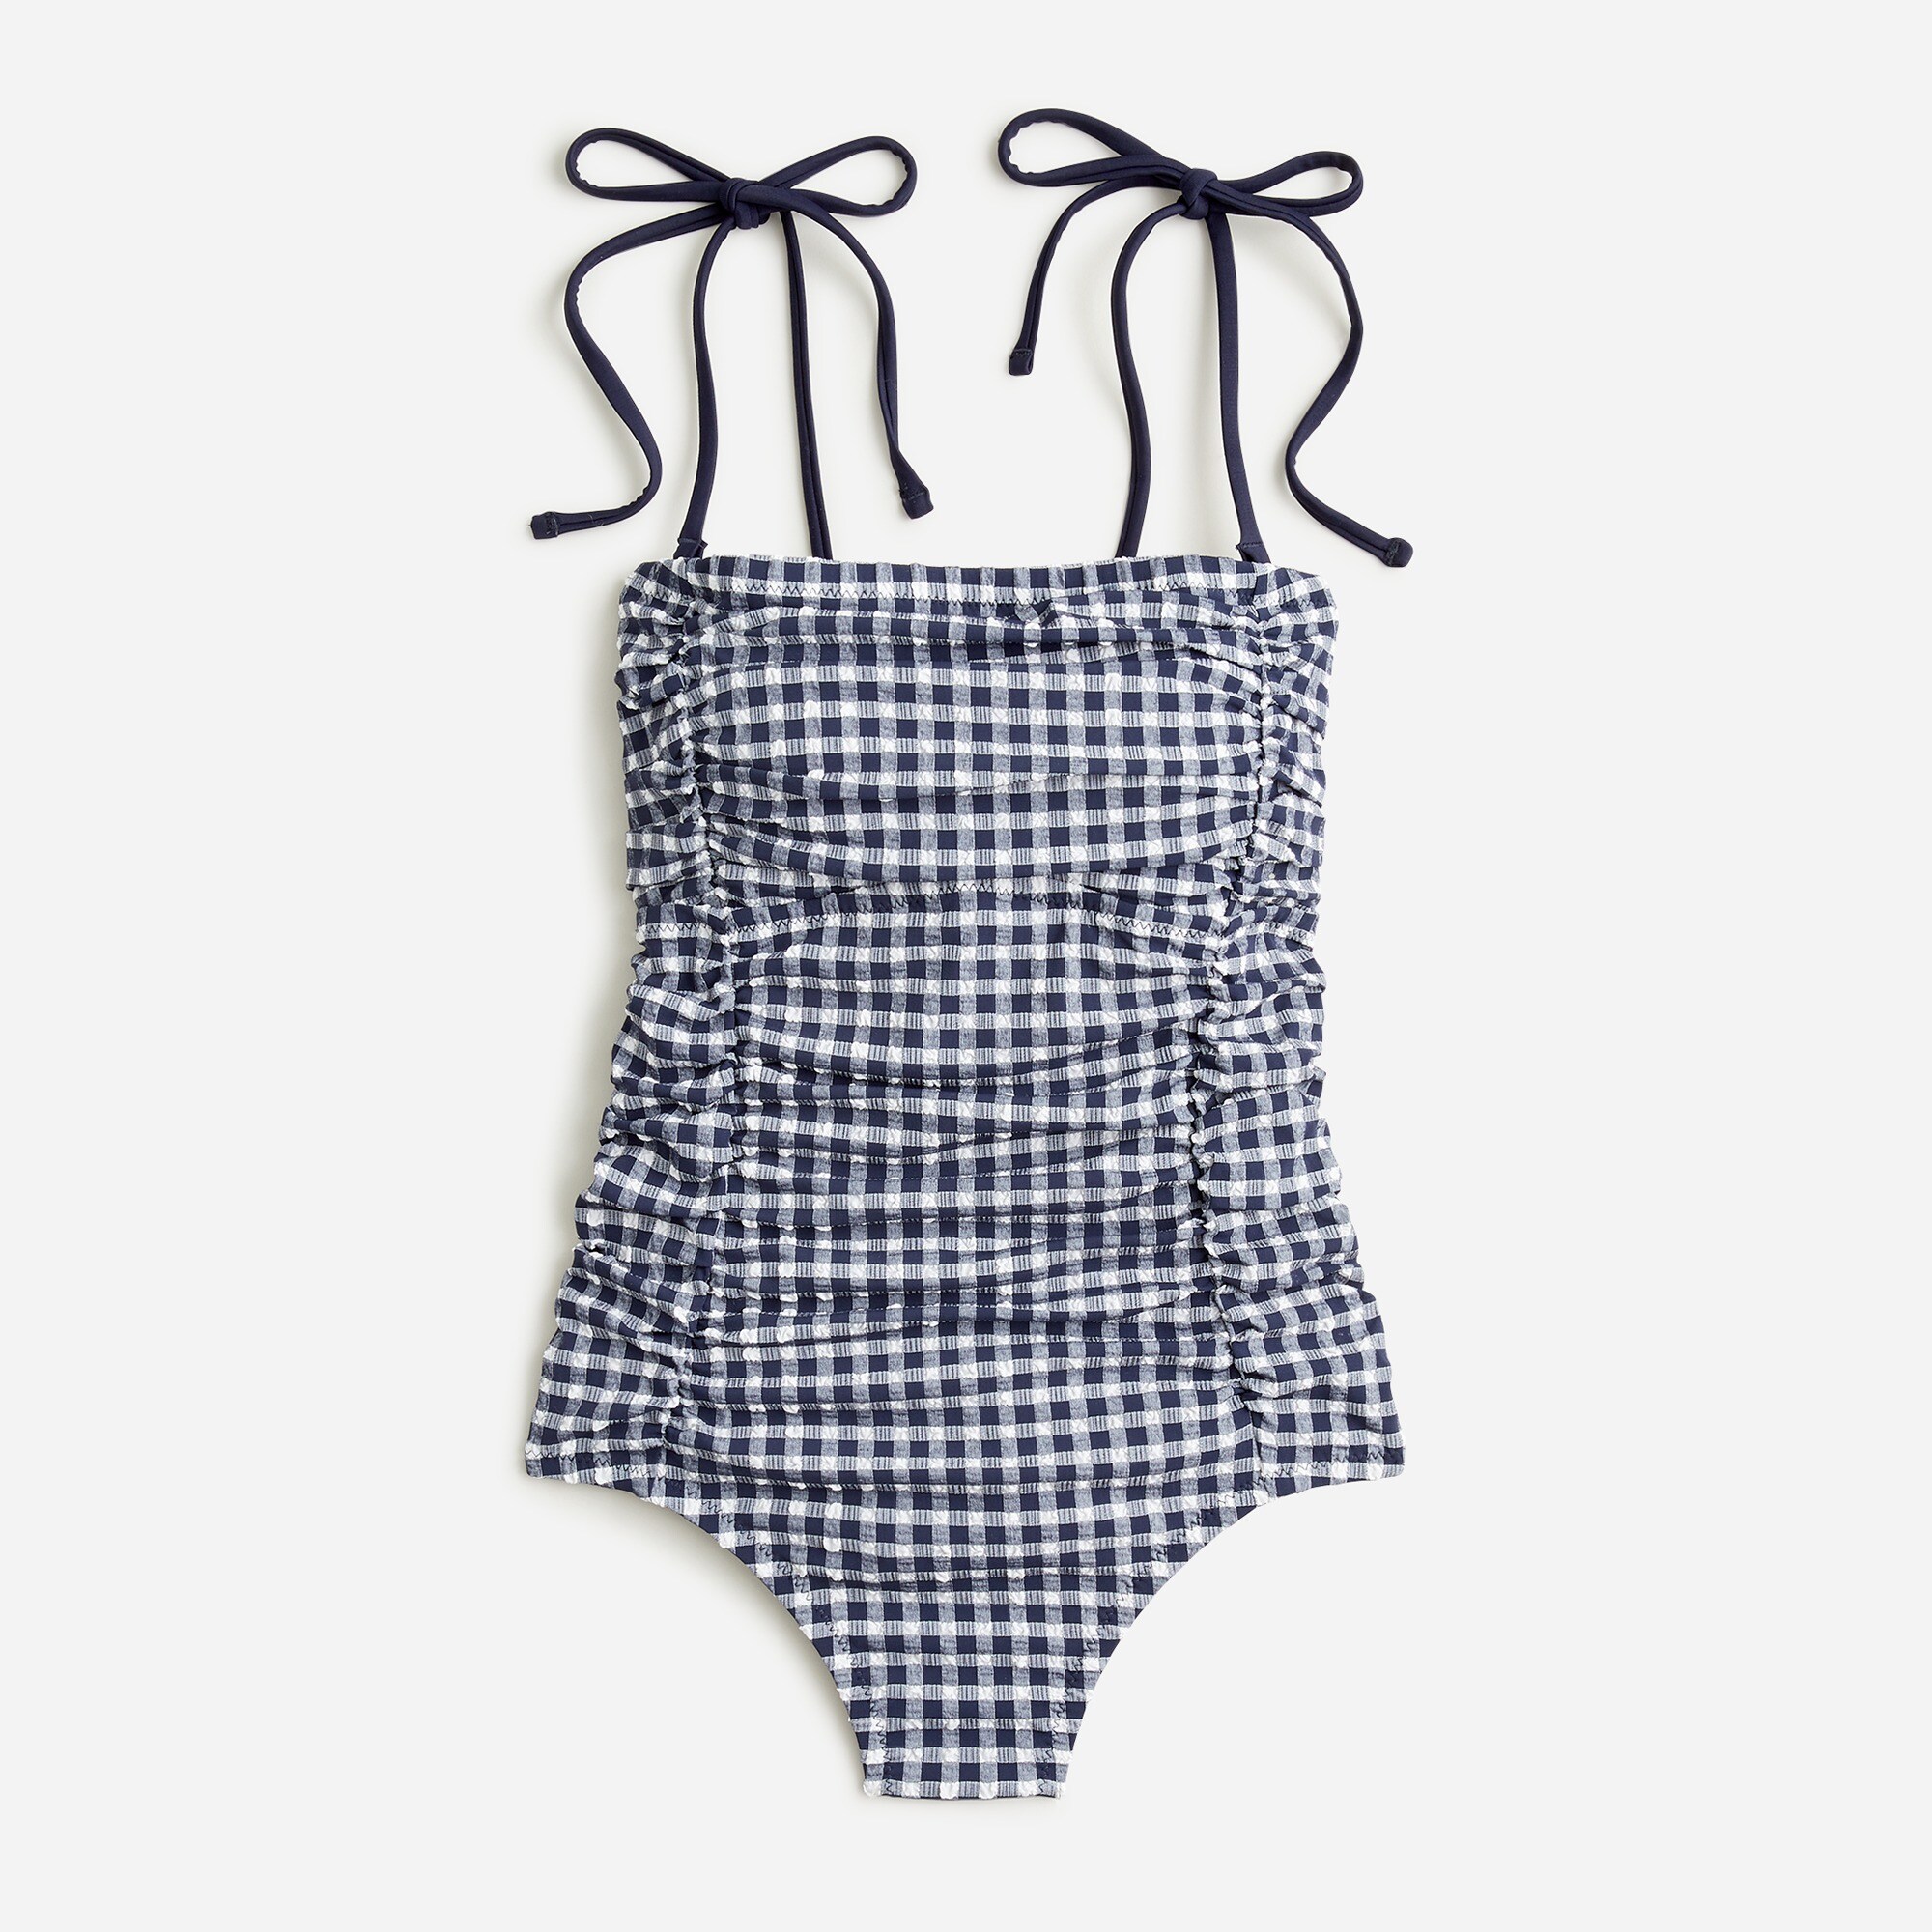  Ruched tie-shoulder one-piece swimsuit in classic gingham